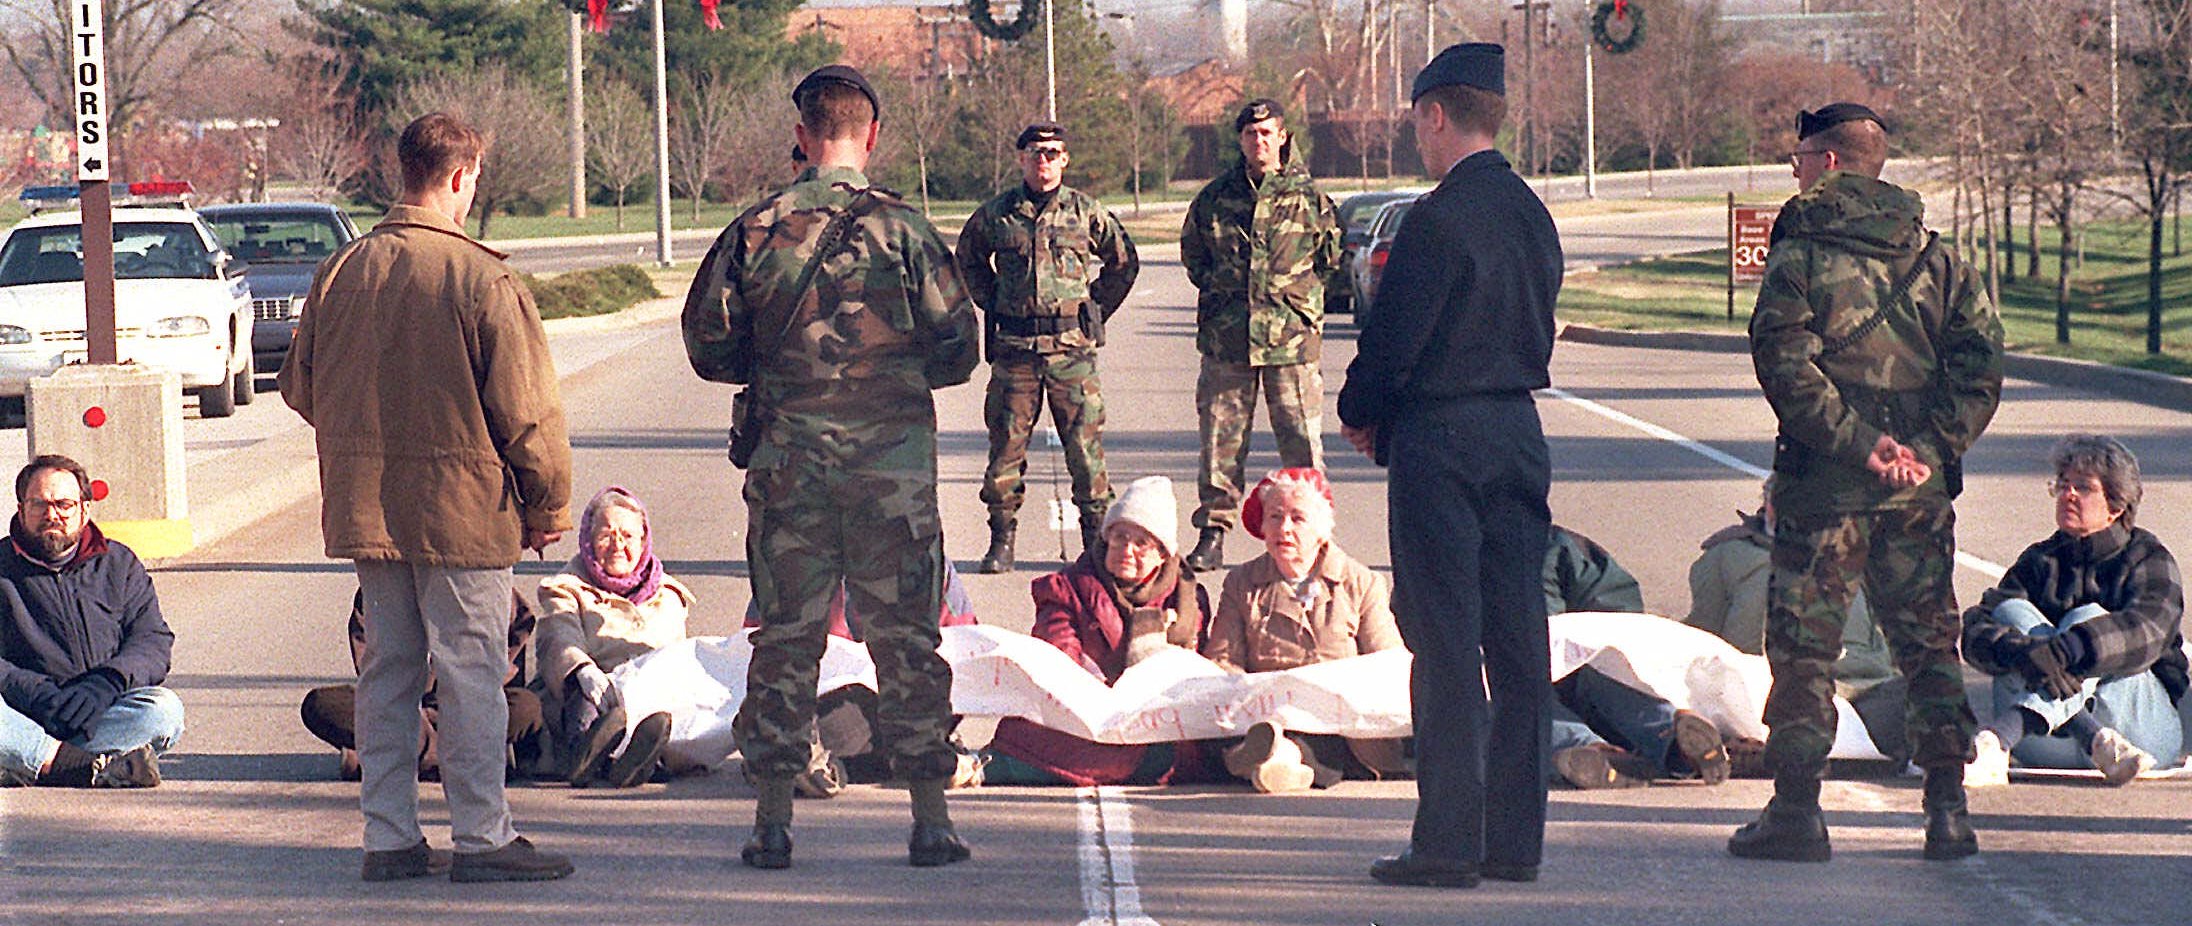 Hedy Epstein and several protesters opposed to the U.S. bombing of Iraq are seated on the road blocking the gate to Scott Air Force Base. Military personnel stand in front and behind the protesters.